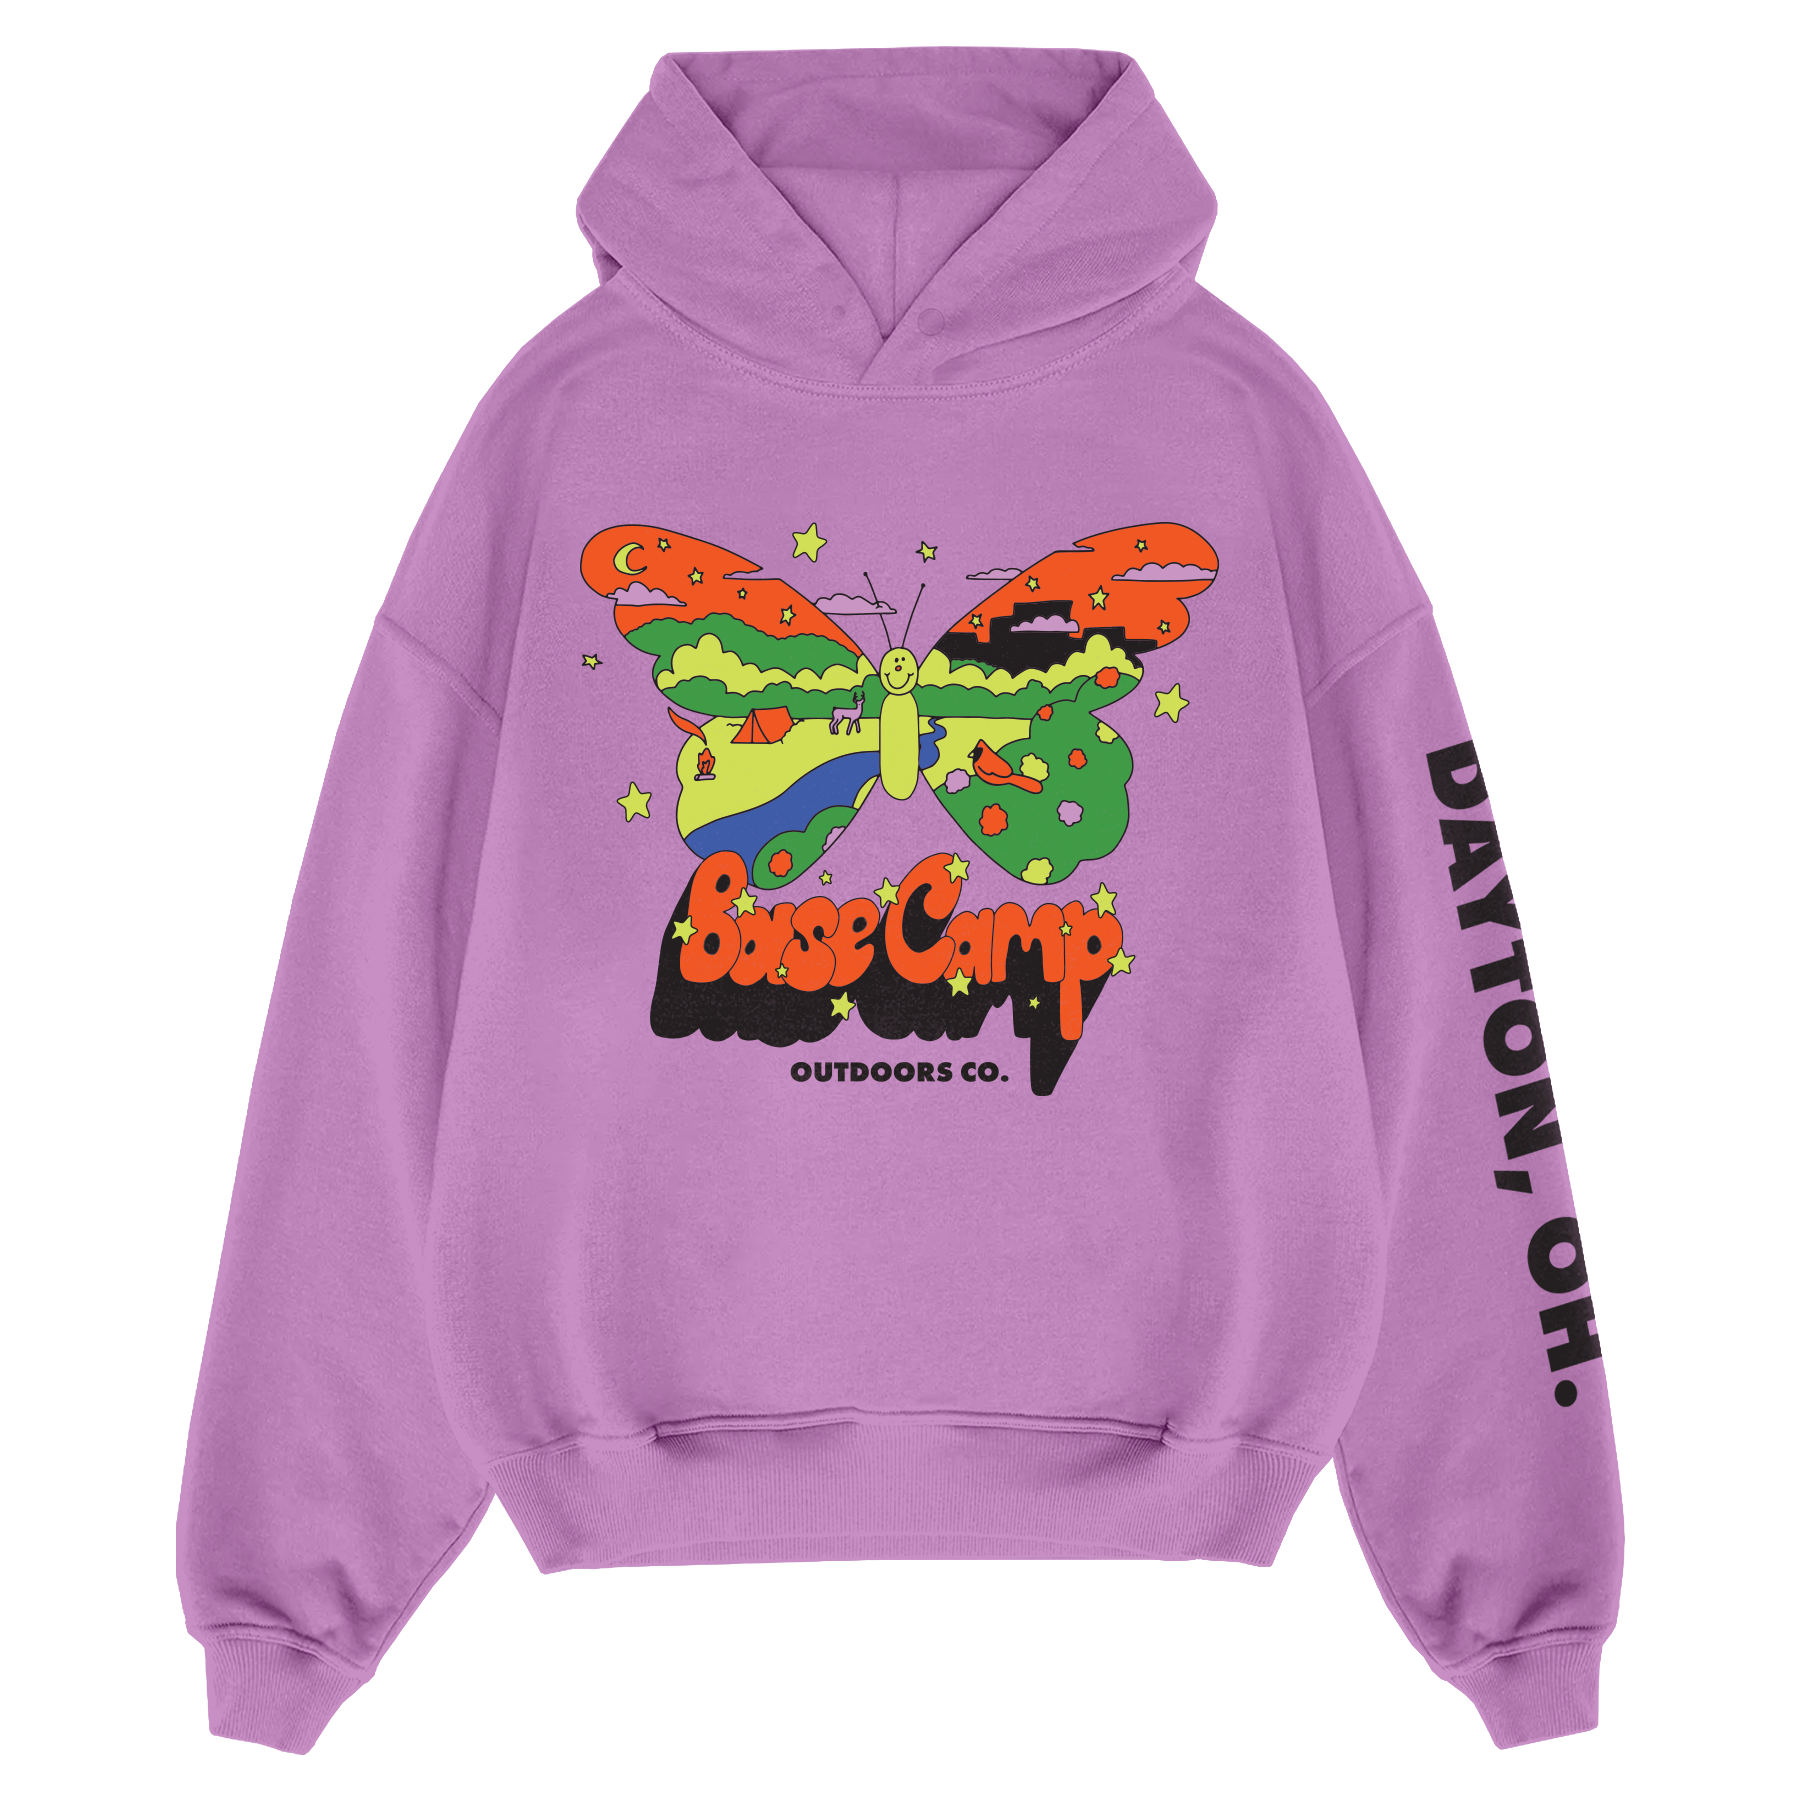 Psychedelic Hoodie - Base Camp Outdoors Co